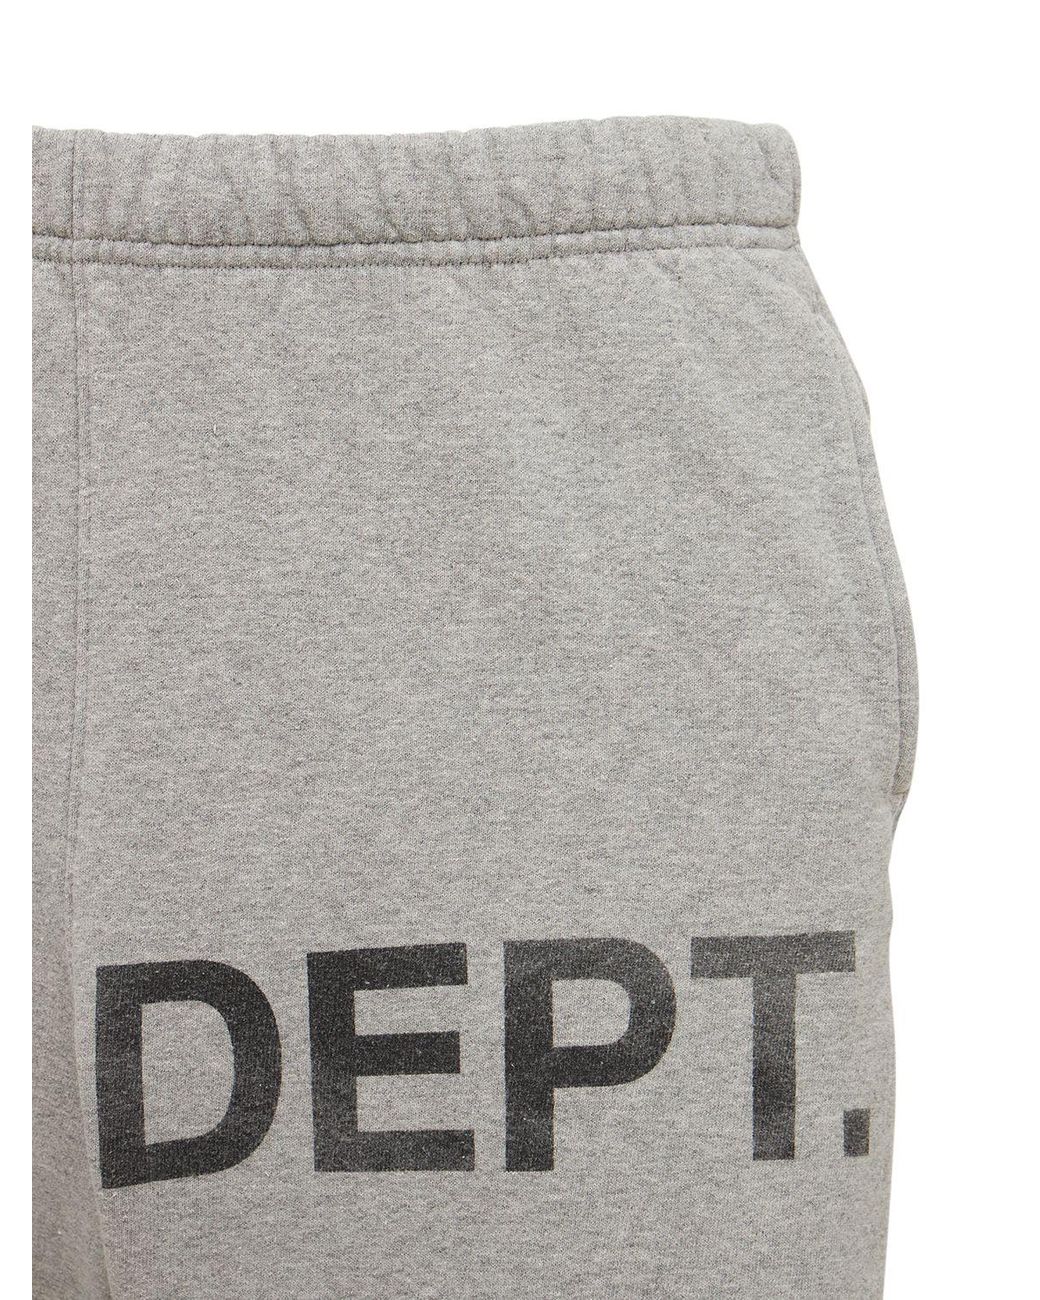 GALLERY DEPT. Logo Vintage Printed Cotton Sweat Shorts in Gray 